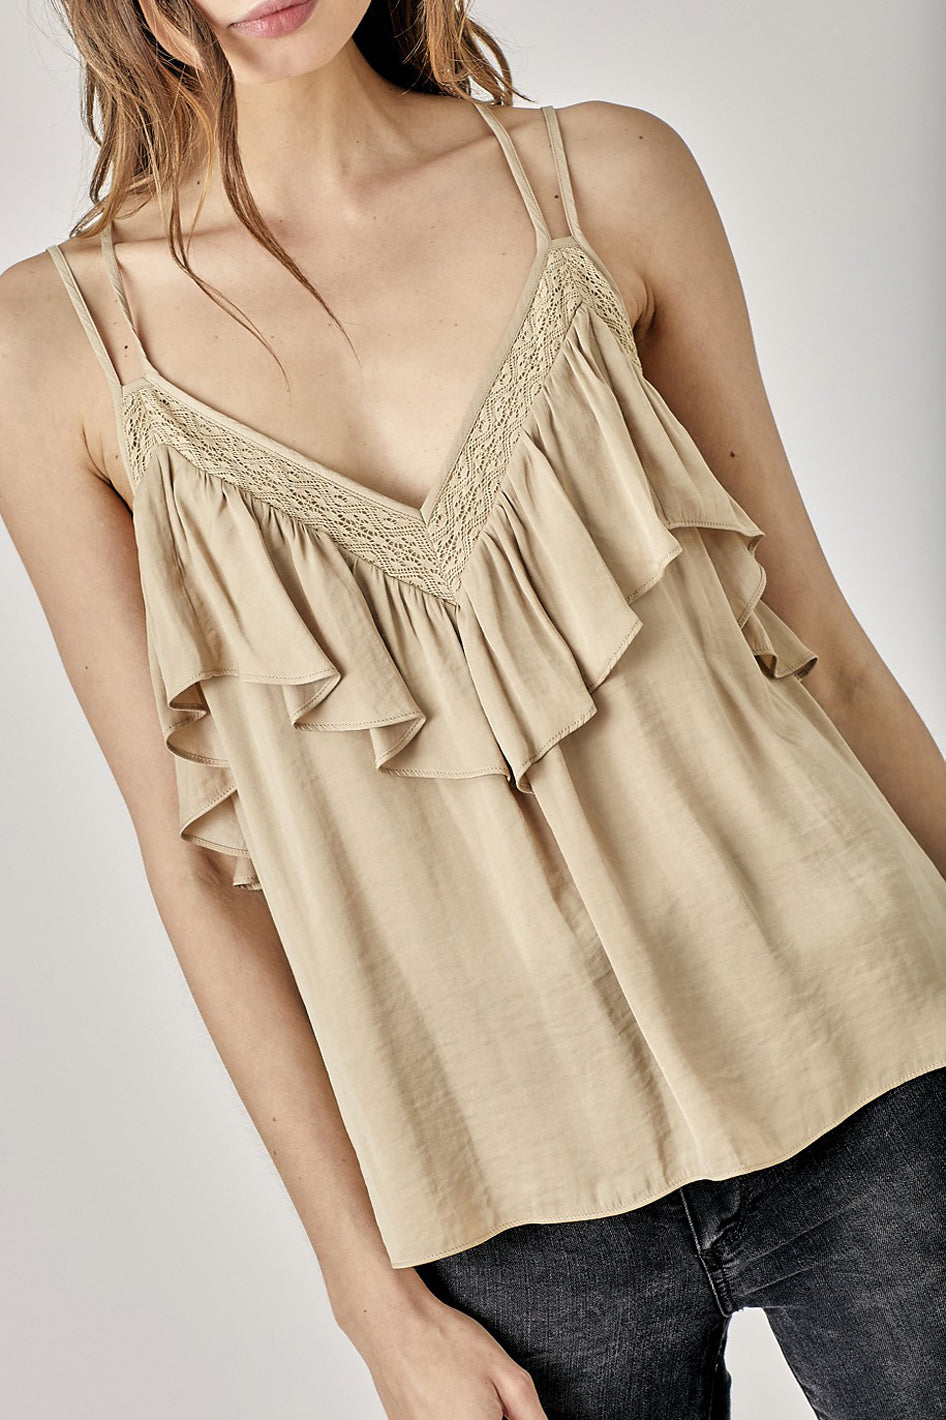 Trim Detail with Ruffle Cami Top - Azoroh